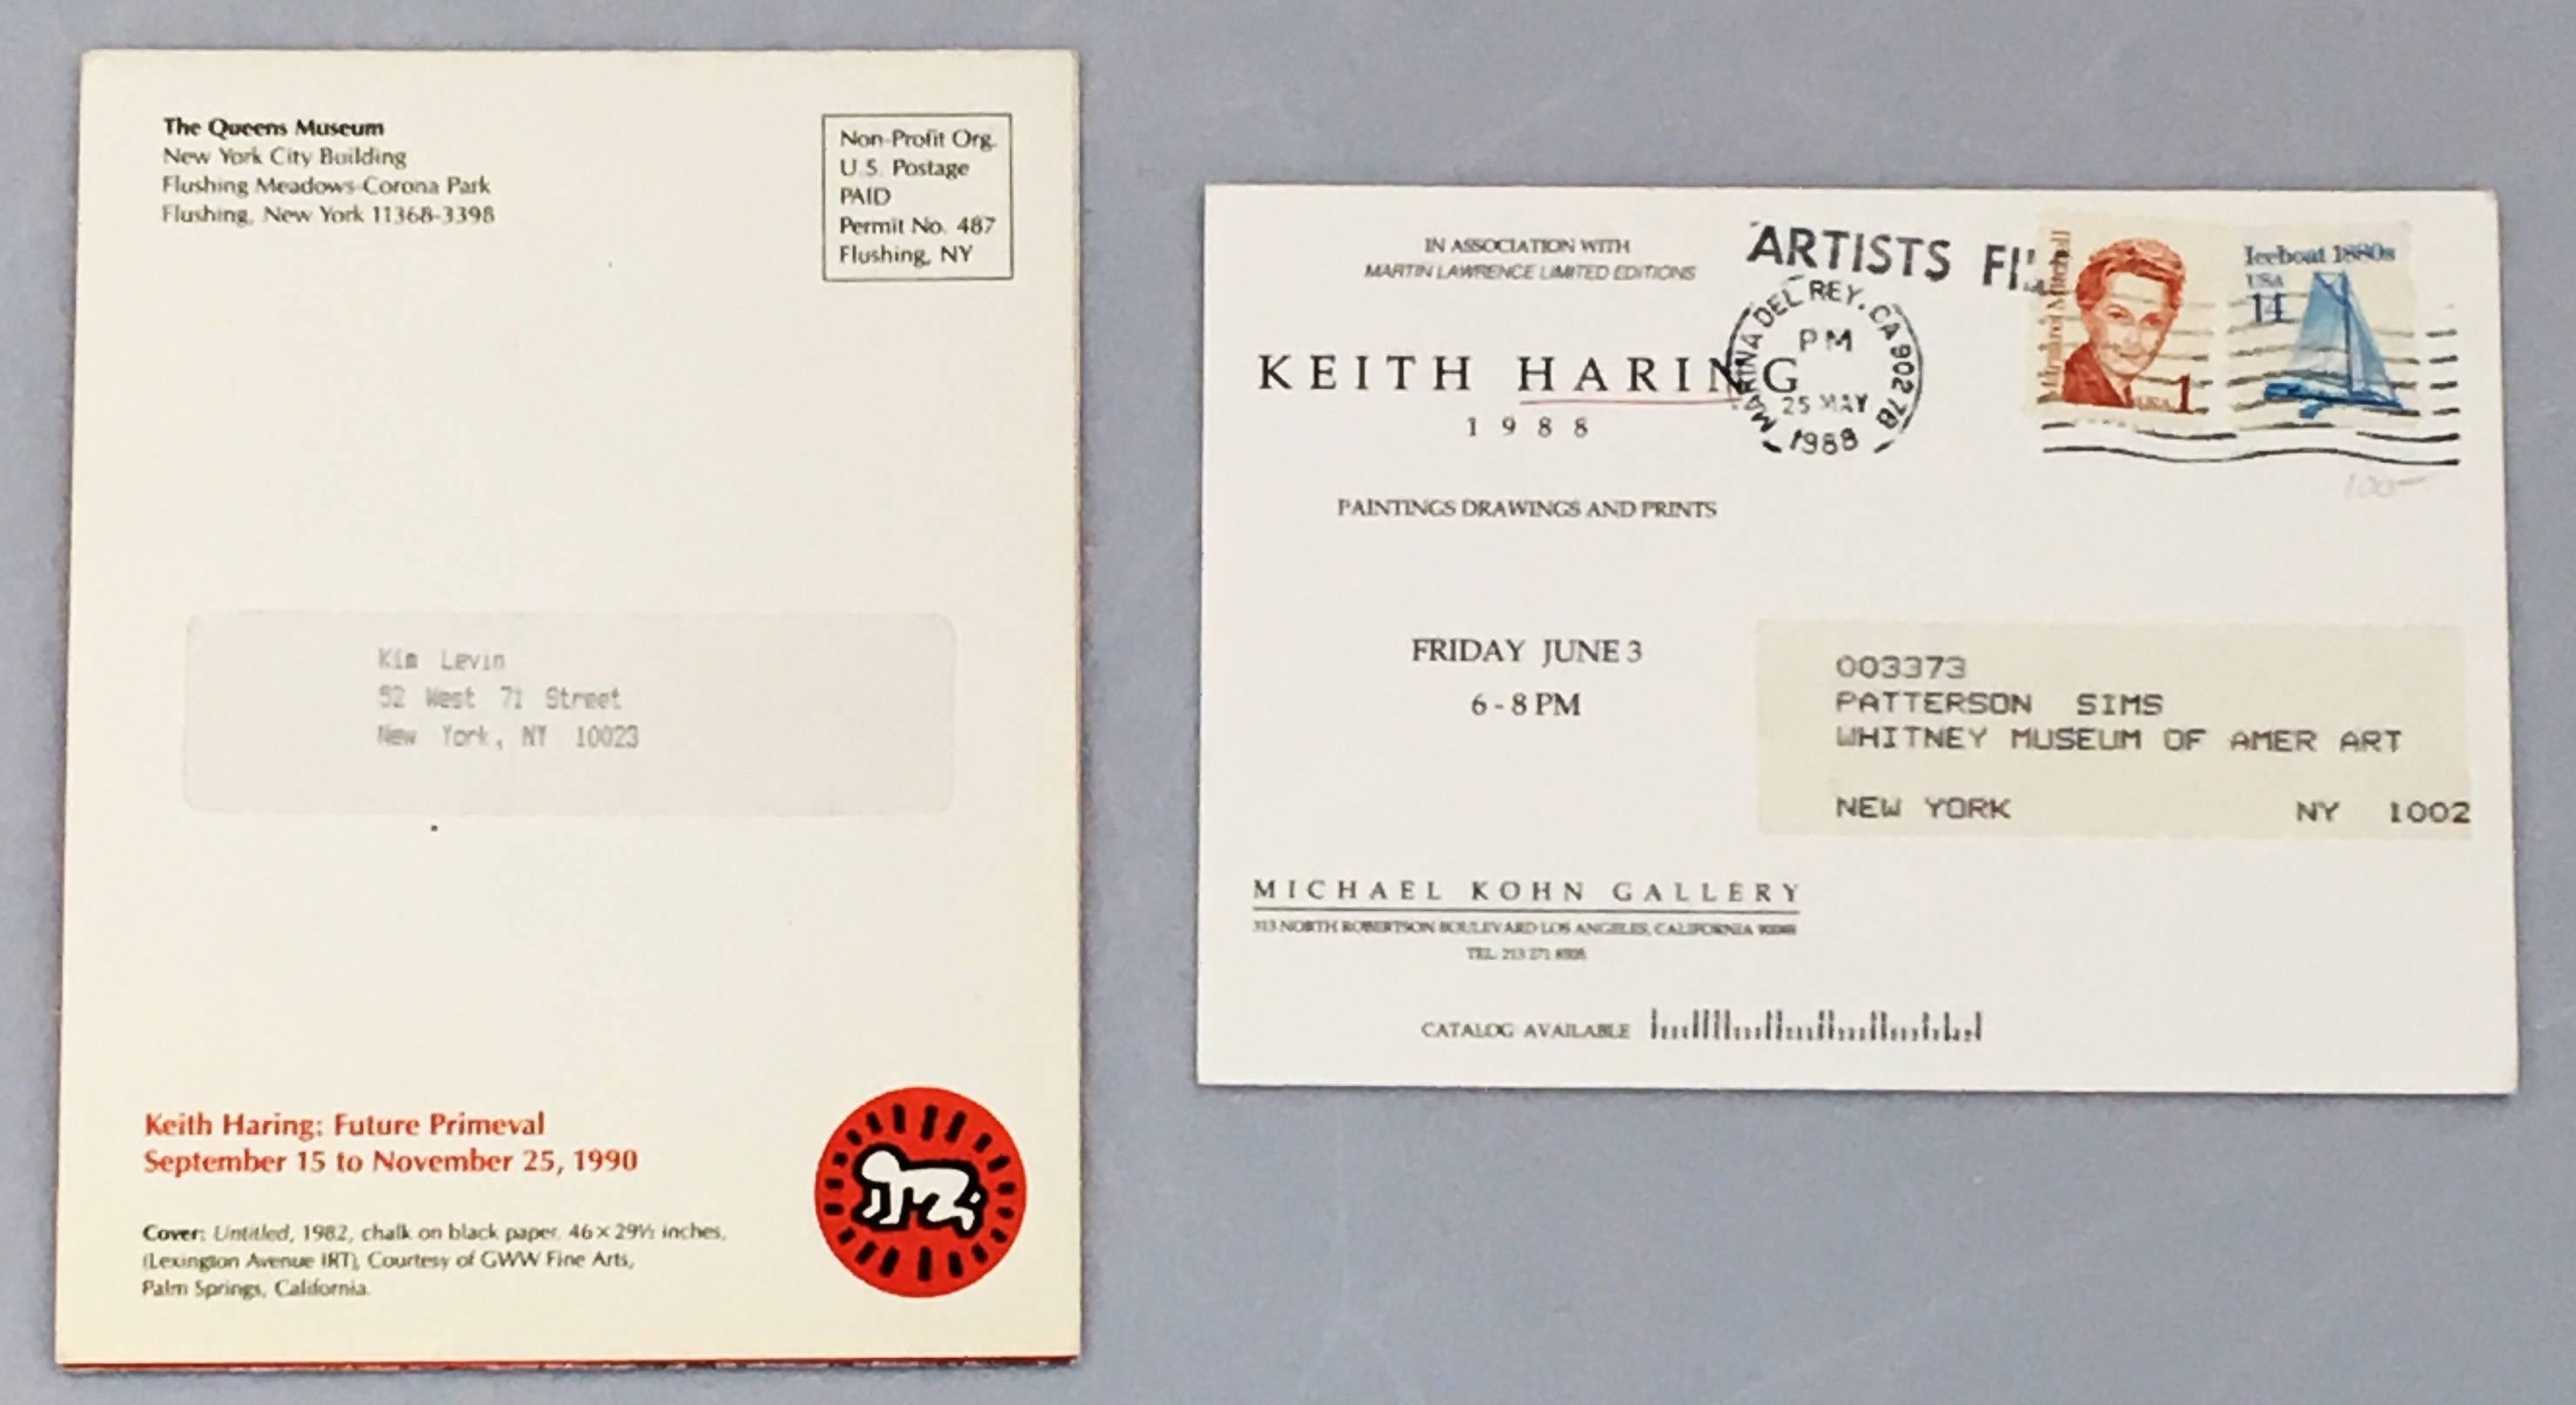 A brilliant set of two vintage Keith Haring illustrated announcement cards for the exhibitions:

Keith Haring Future Primeval at the Queens Museum, New York, 1990

Keith Haring at Michael Kohn Gallery, Los Angeles, 1988

Offset print on